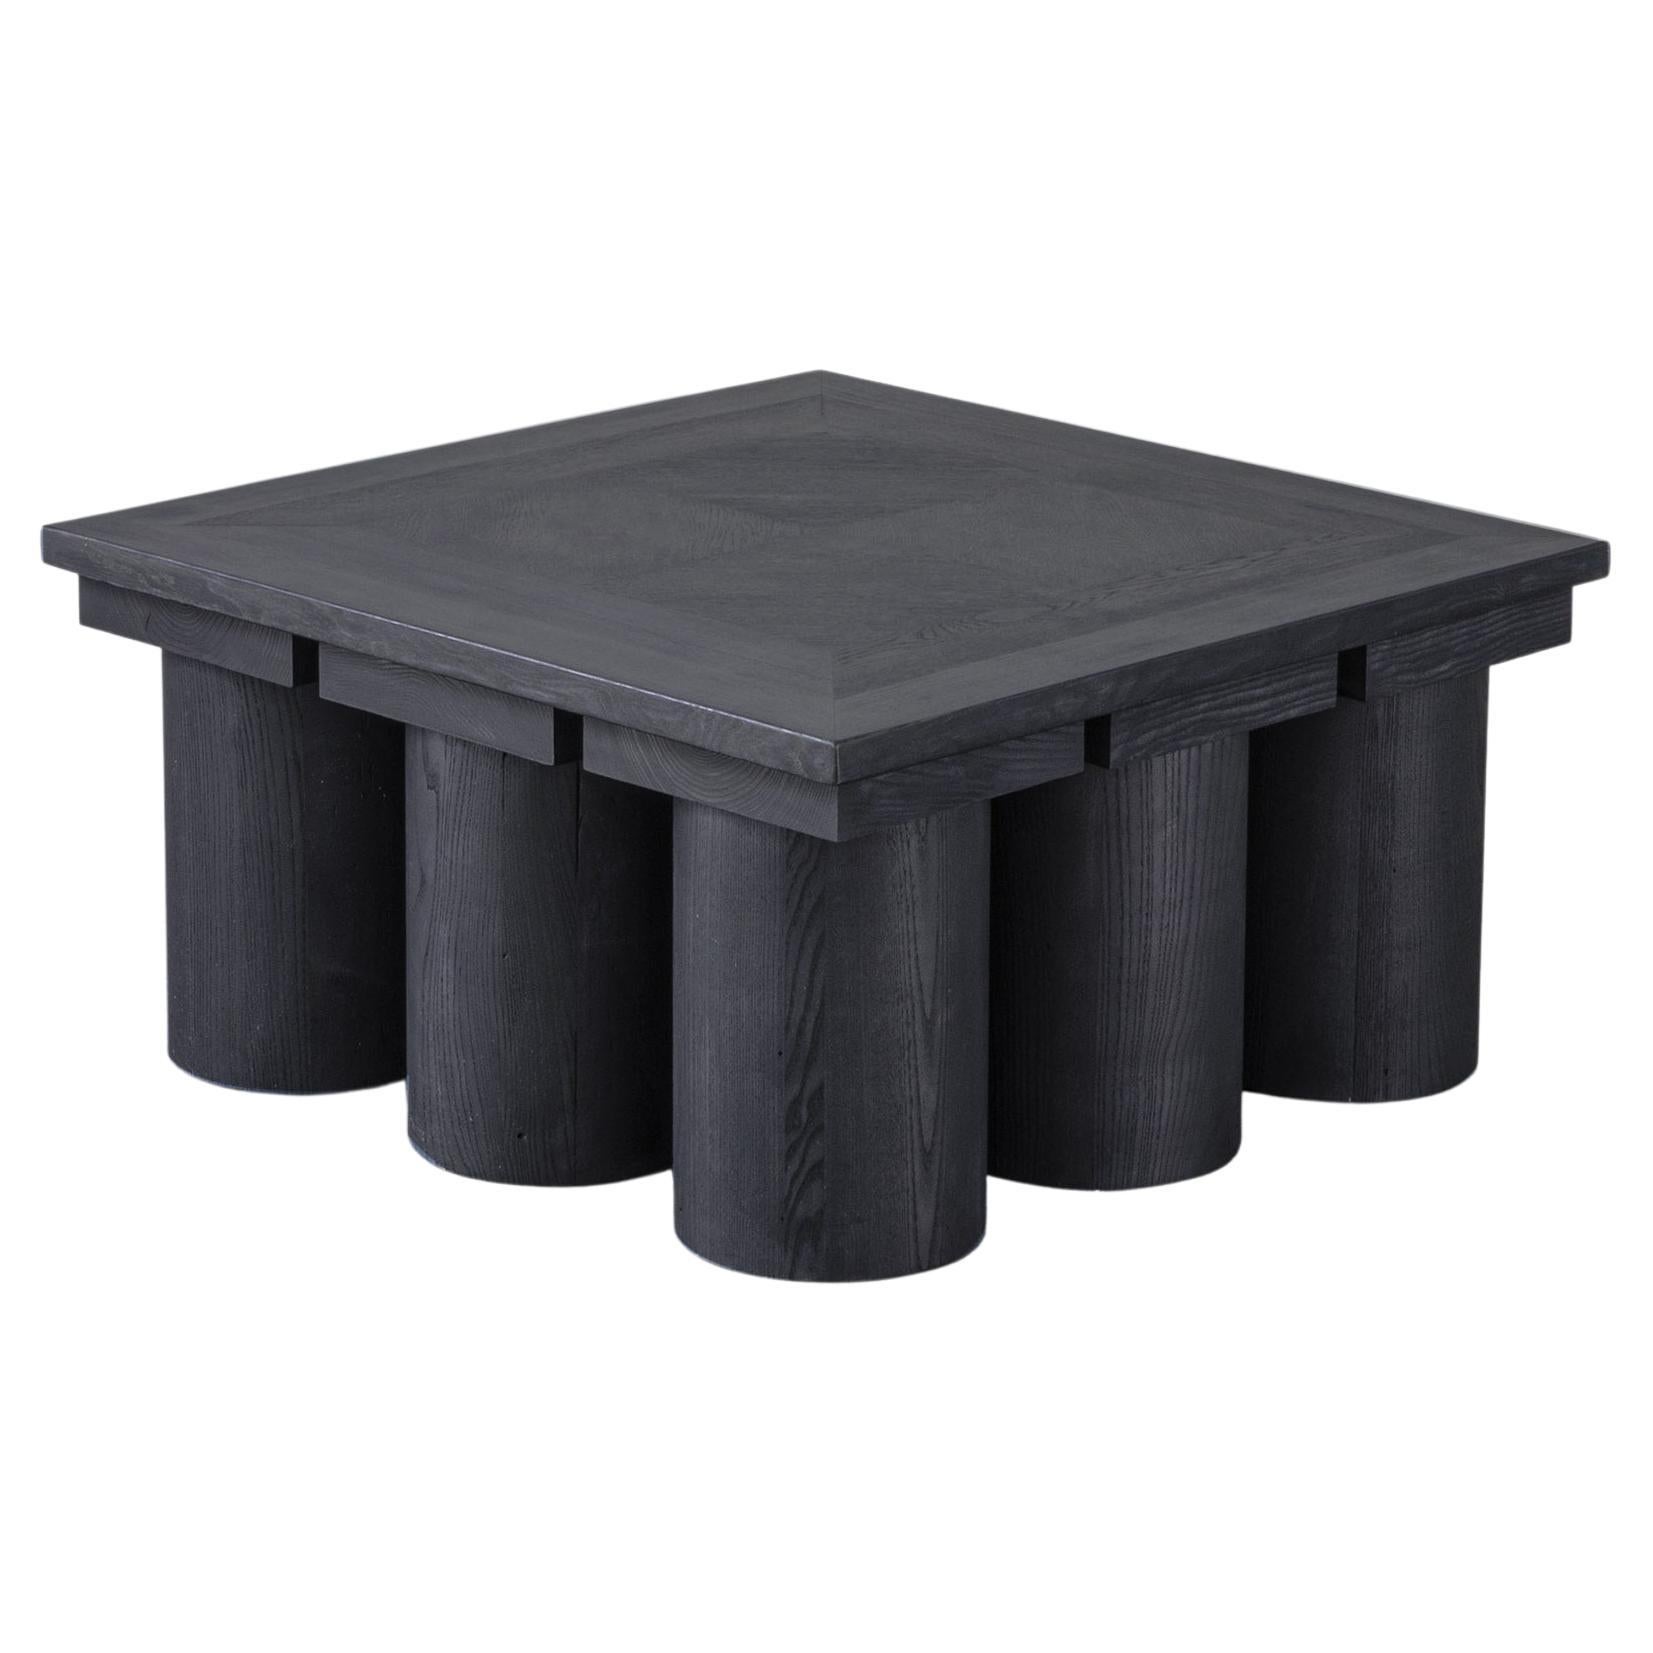 Veltrusy Mansion Sculptural Coffee Table Made Out of Reclaimed Ash Wood For Sale